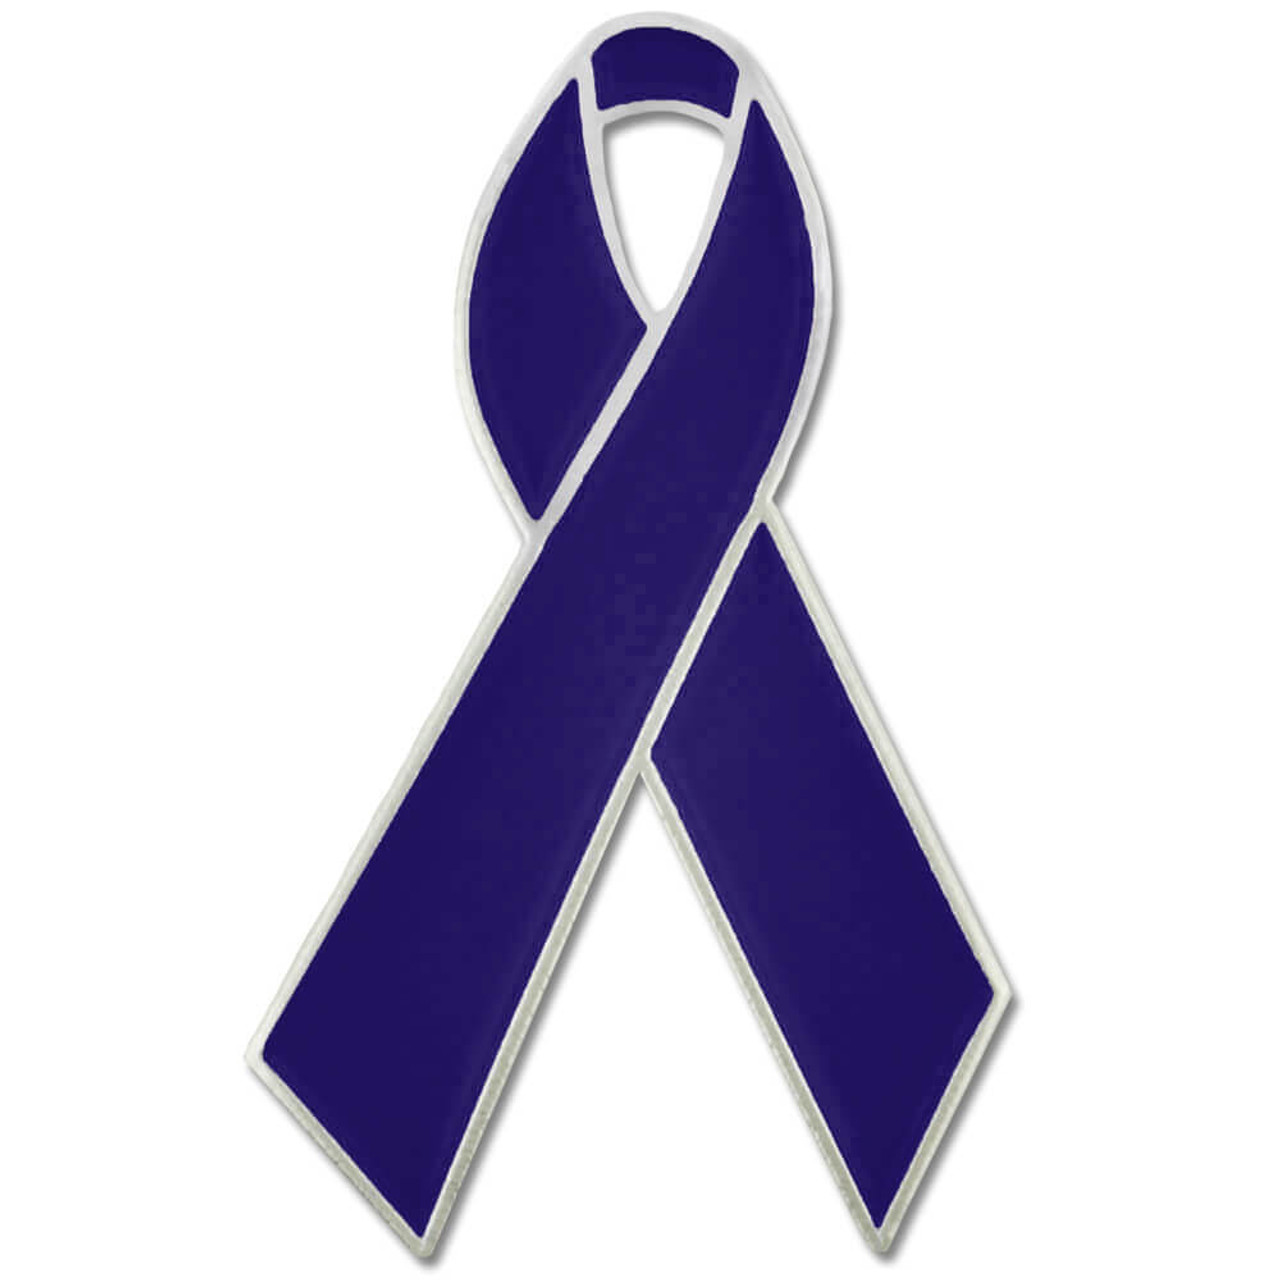 Colors of Cancer Awareness Ribbons: Symbolizing Support and